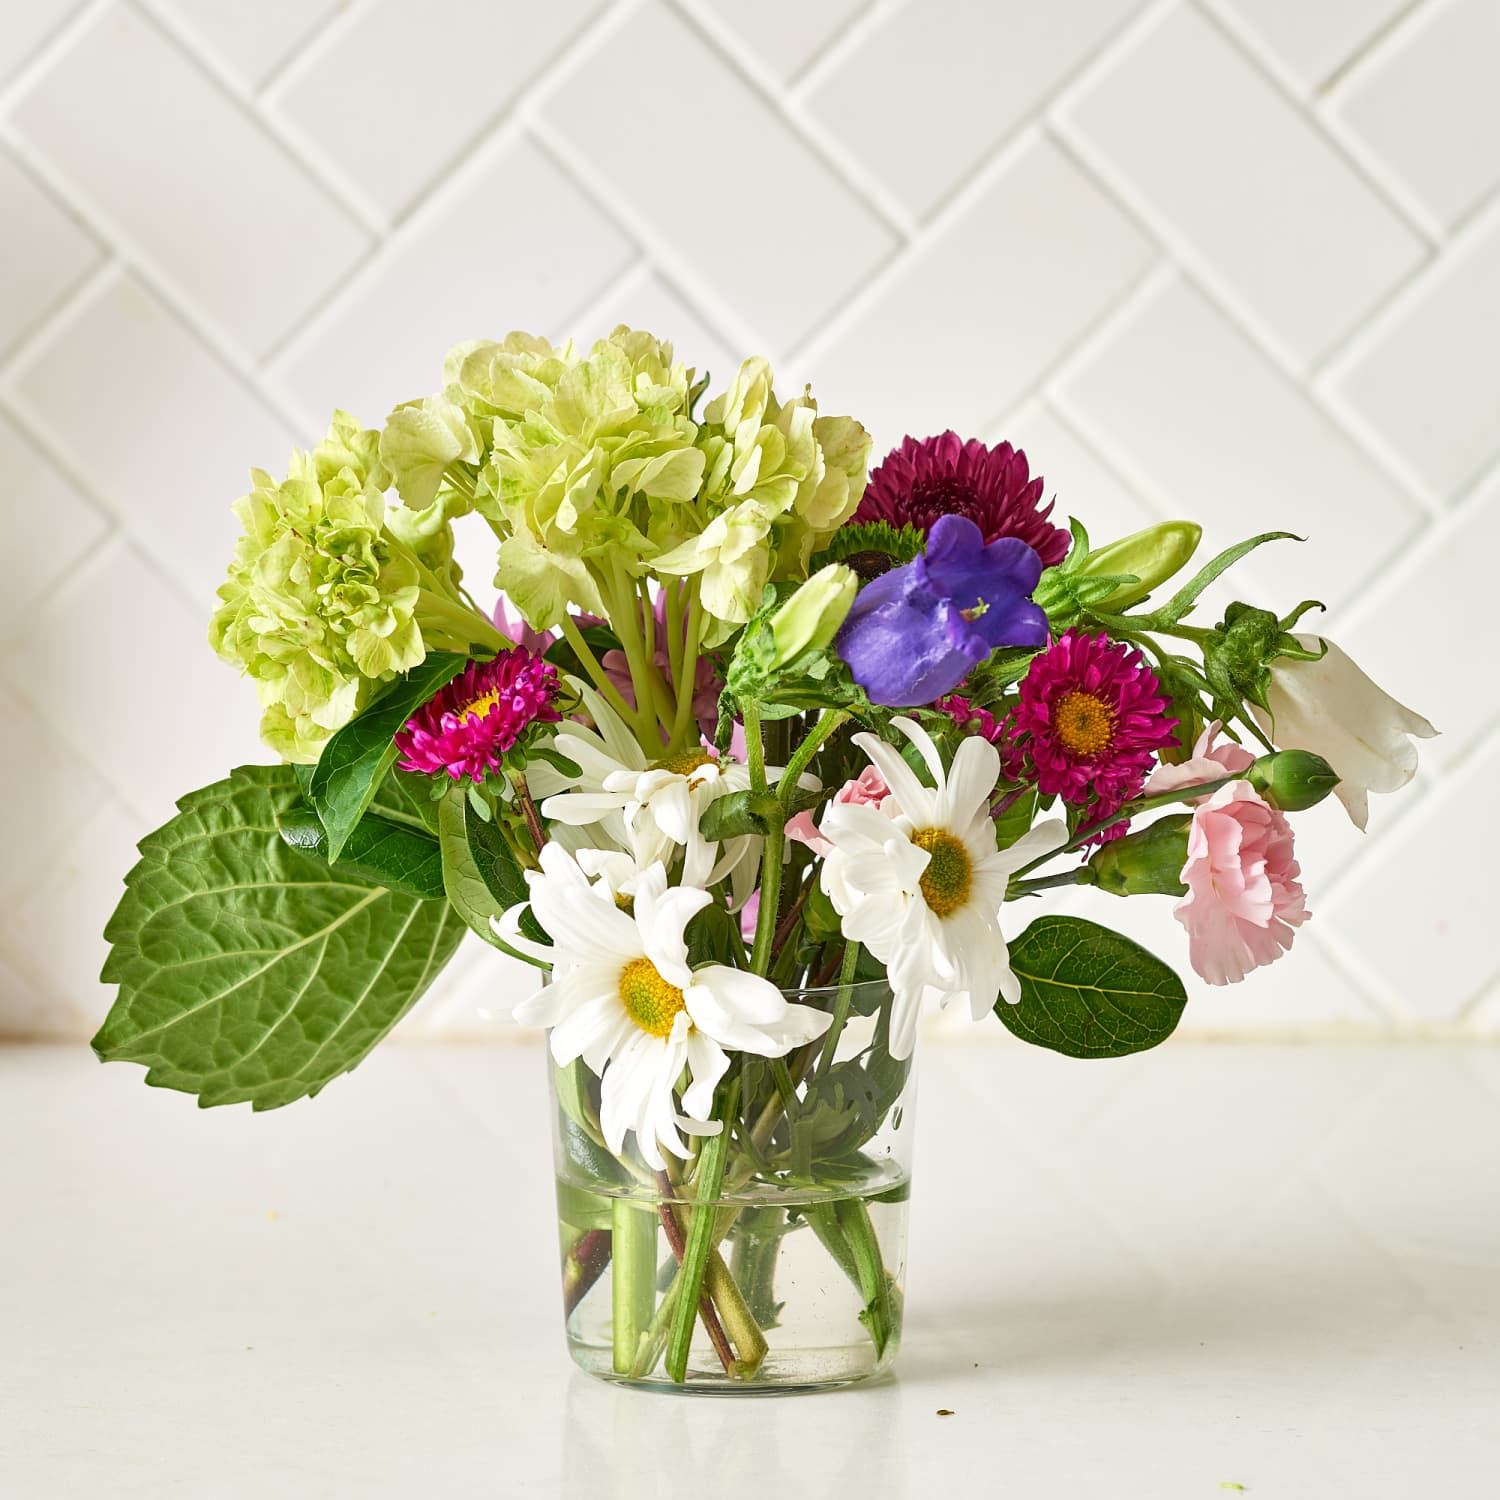 How to Keep Your Flowers Fresh for Long: 5 Easy Techniques